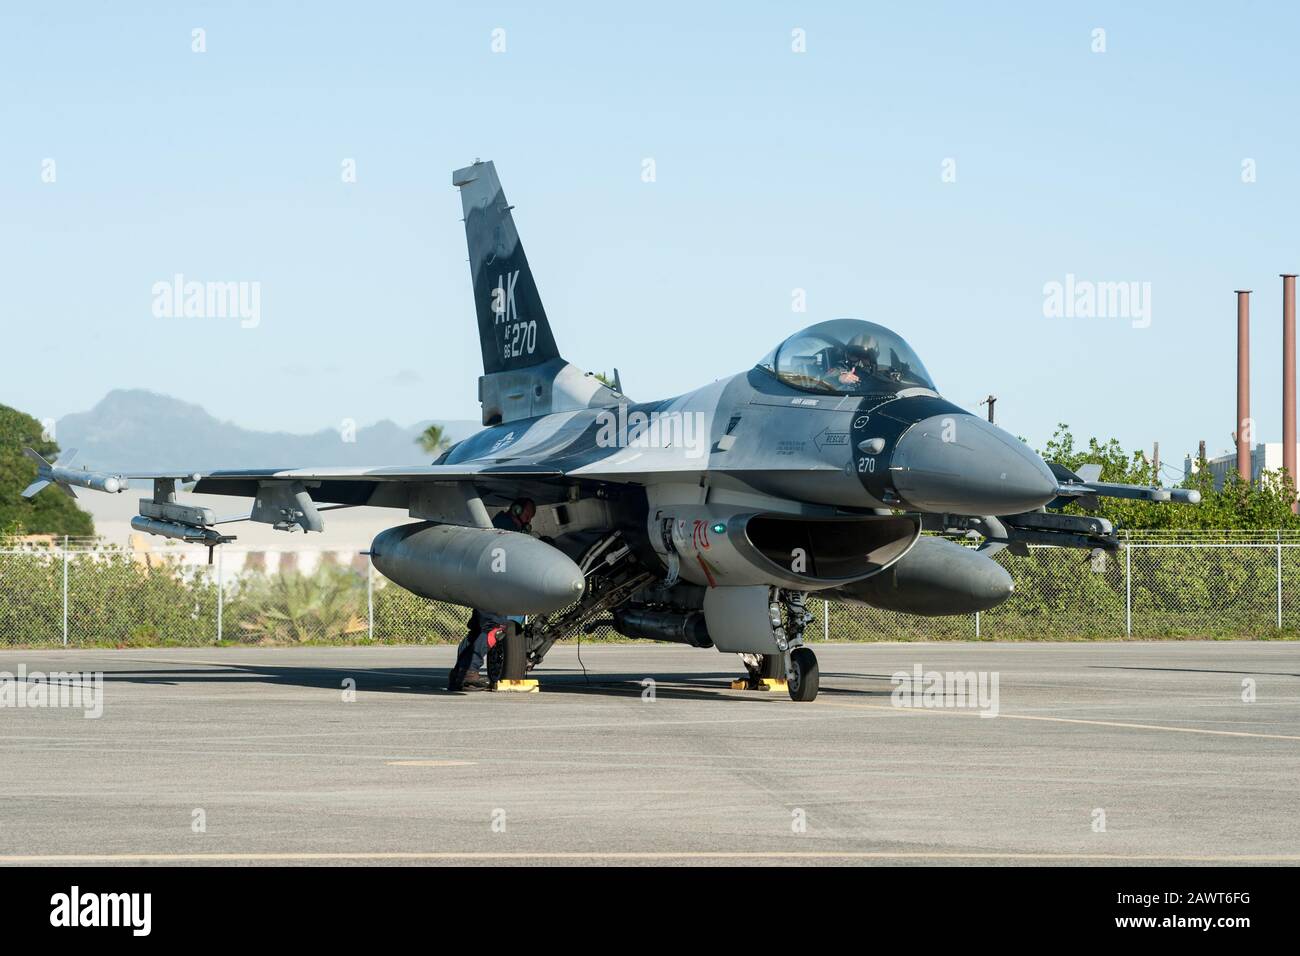 An F-16 Fighting Falcon from the 18th Aggressor Squadron prepares for flight Feb. 4, 2020, at Joint Base Pearl Harbor-Hickam, Hawaii. The aircraft practiced combat tactics alongside the world’s most advanced fifth-generation airframes, the F-22 Raptor and F-35A Lightning II. The F-16 is assigned to the 18th Aggressor Squadron in Eielson Air Force Base, Alaska, and its mission is to prepare pilots for victory by simulating combat tactics which are likely to be faced in the event of an air-to-air battle.  (U.S. Air National Guard photo by Senior Airman John Linzmeier) Stock Photo